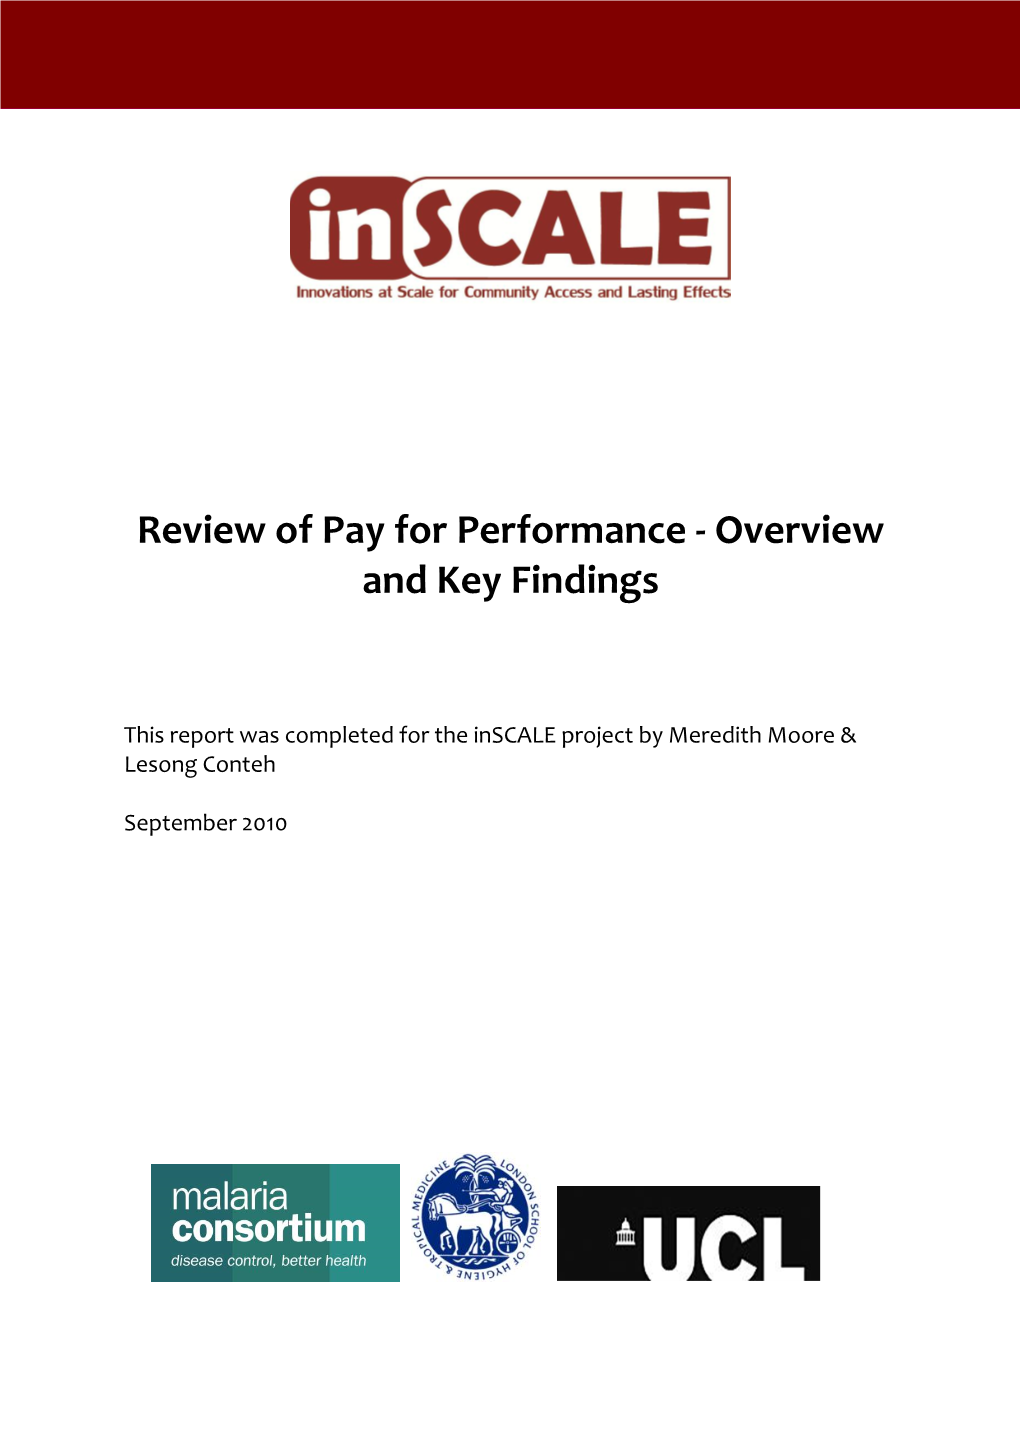 Review of Pay for Performance - Overview and Key Findings